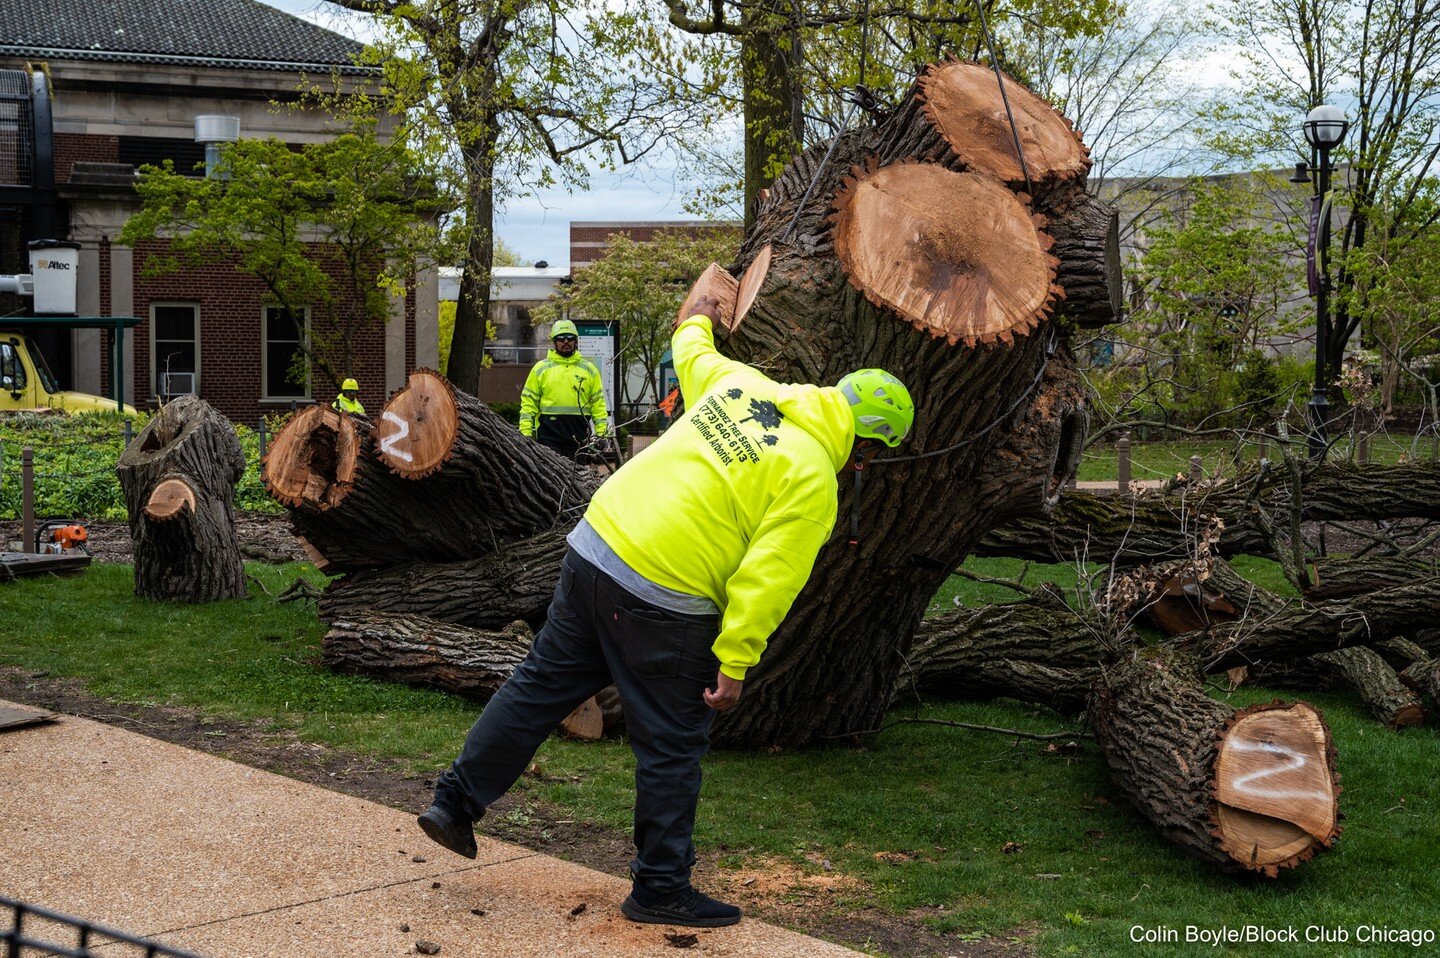 &quot;LINCOLN PARK &mdash; With help from a massive crane, chainsaw-wielding crews took down one of Chicago&rsquo;s oldest trees Tuesday at Lincoln Park Zoo.

At 70 feet tall, the bur oak tree is estimated to be 250-300 years old and believed to pred